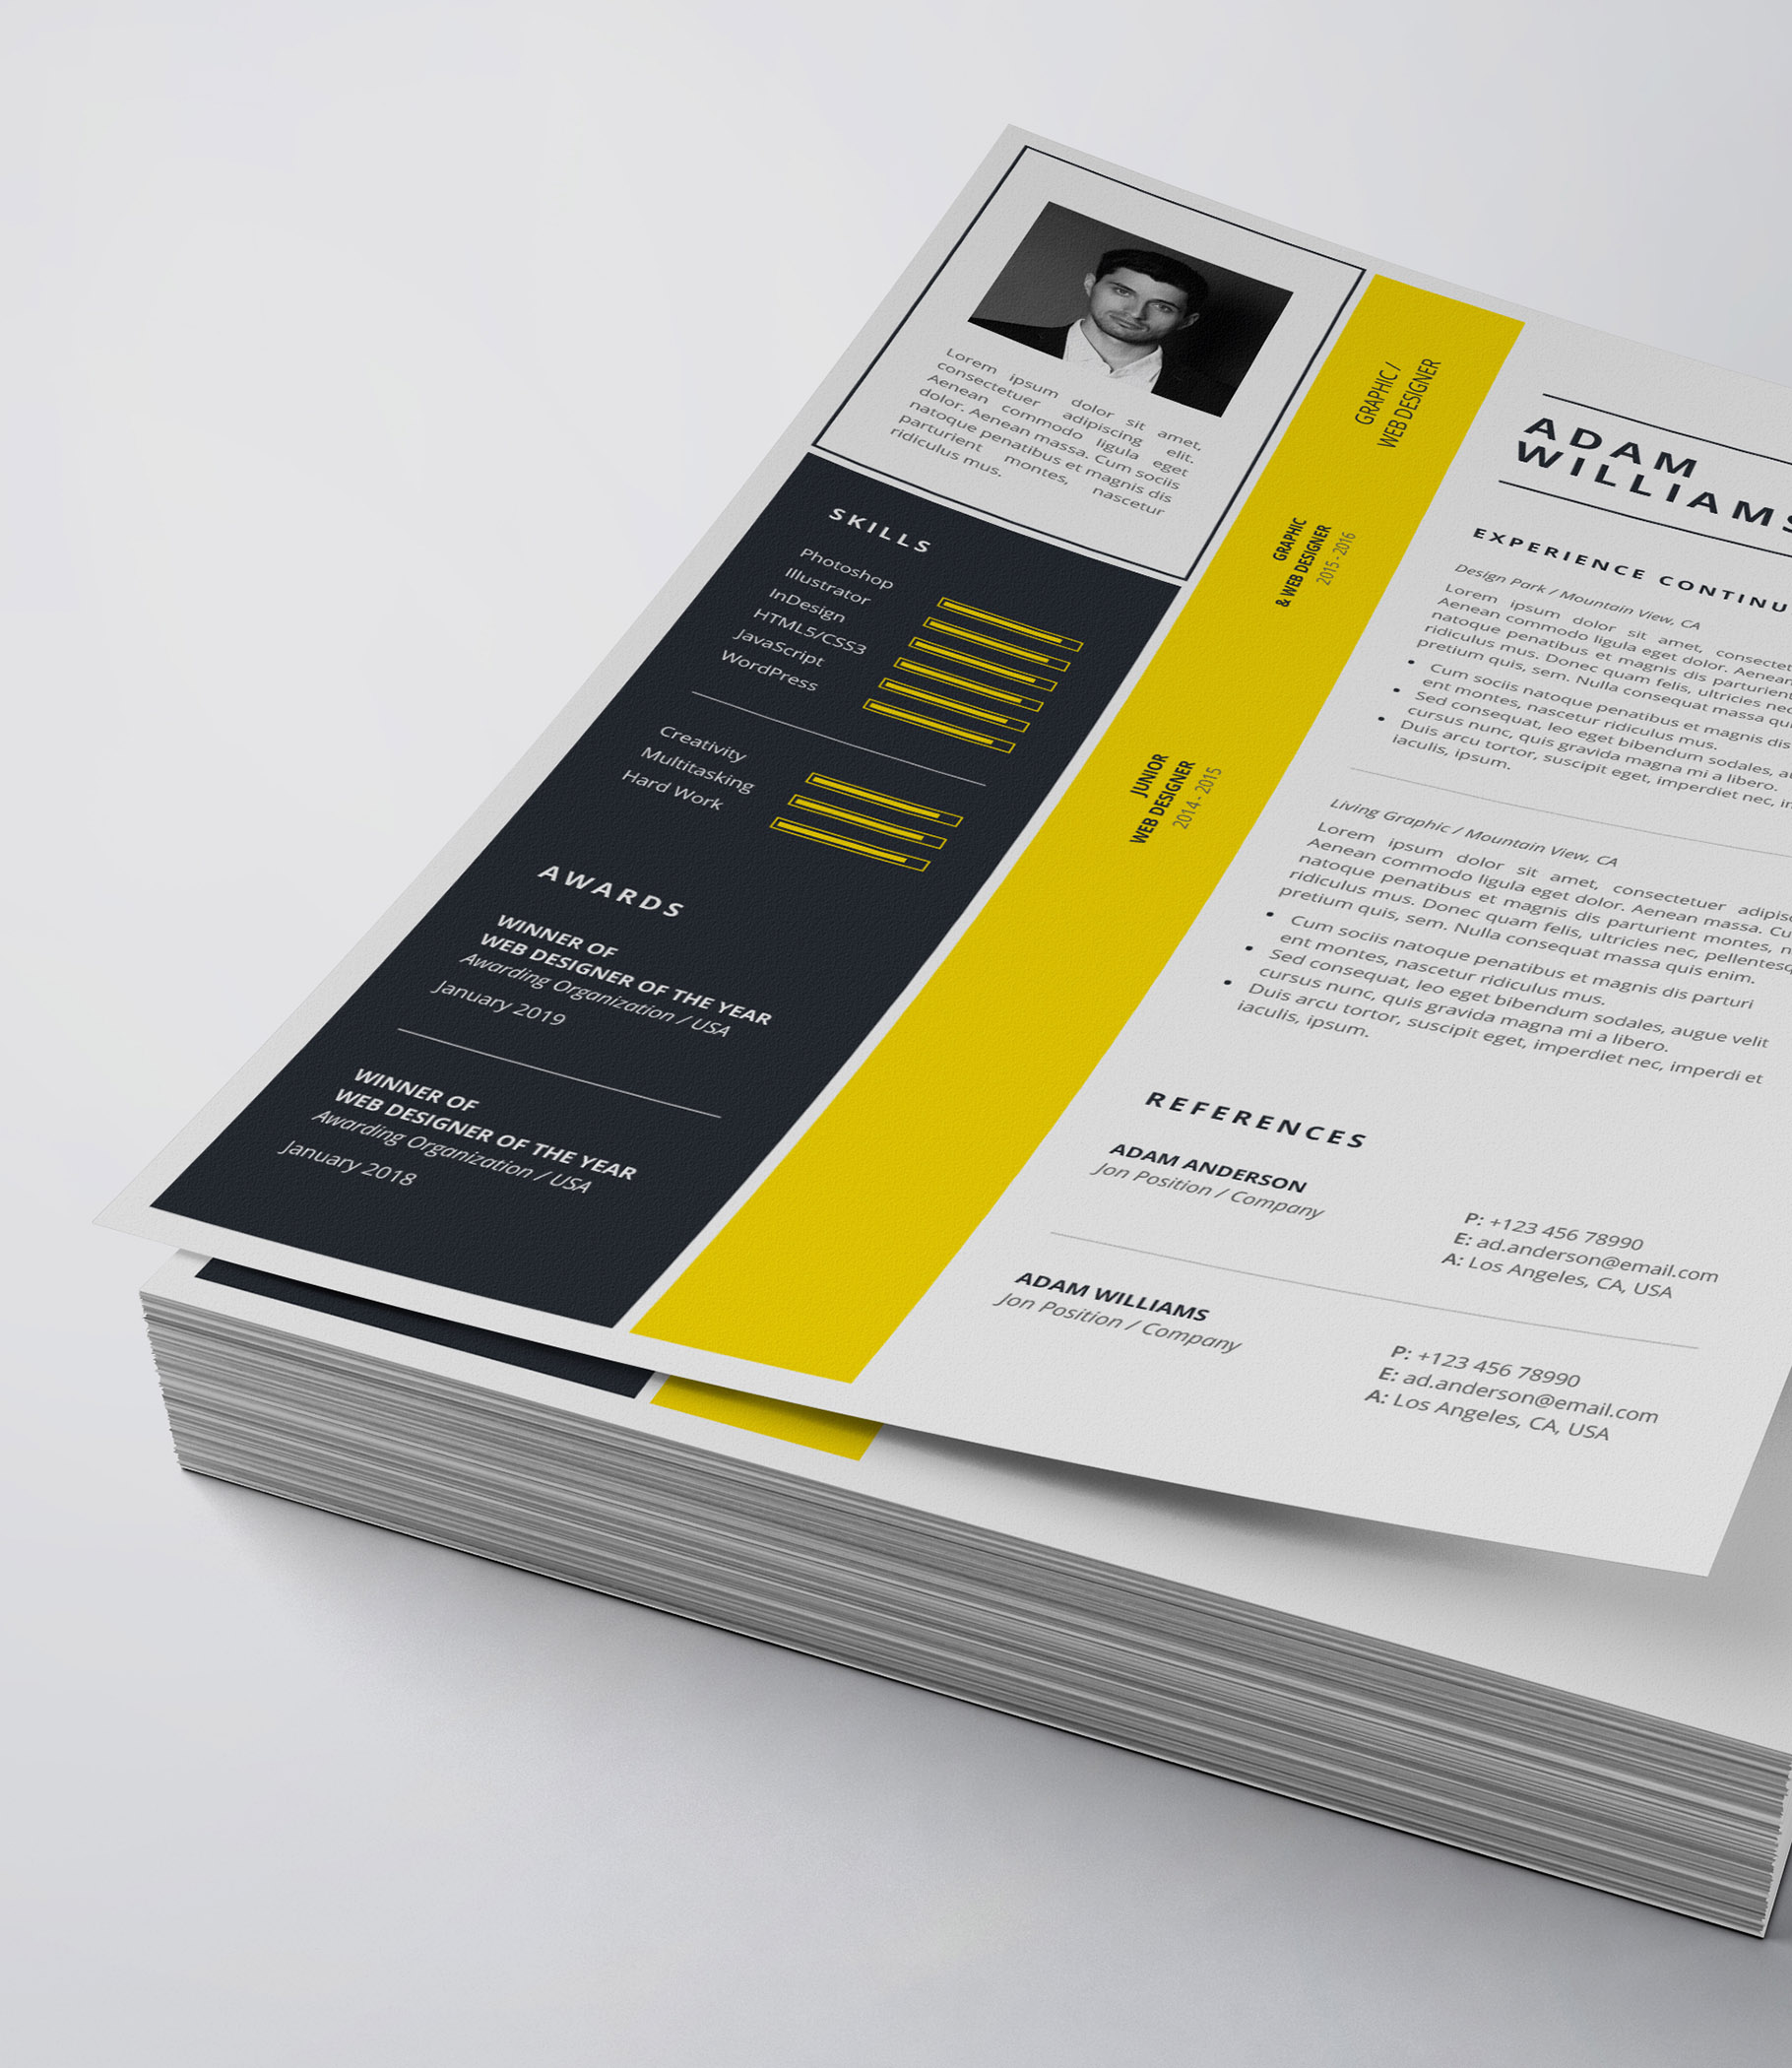 Professional resume template with yellow accents.